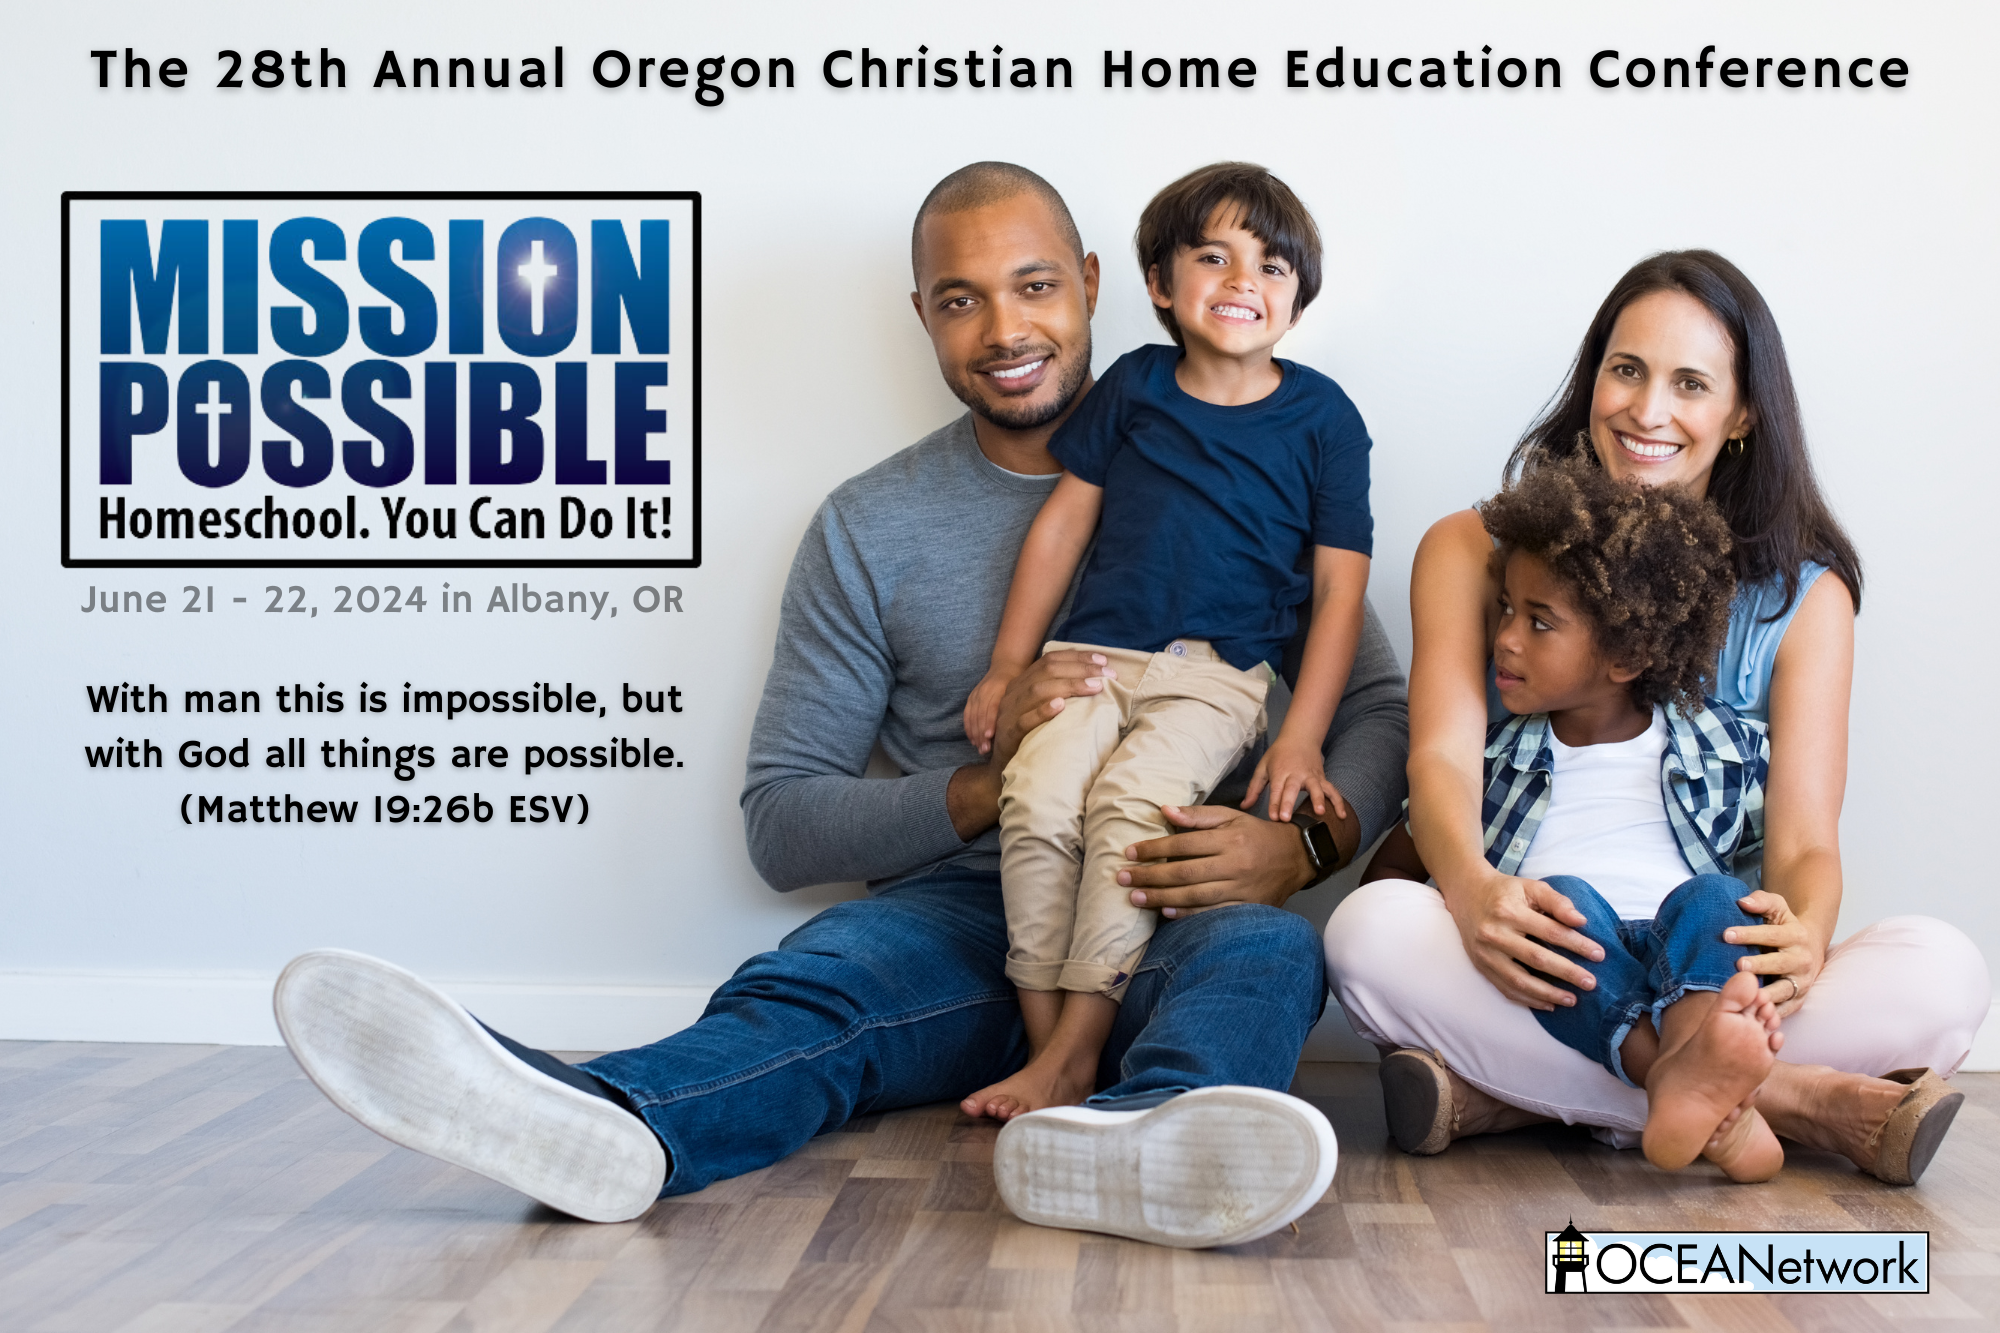 2023 Oregon Christian Home Education Conference